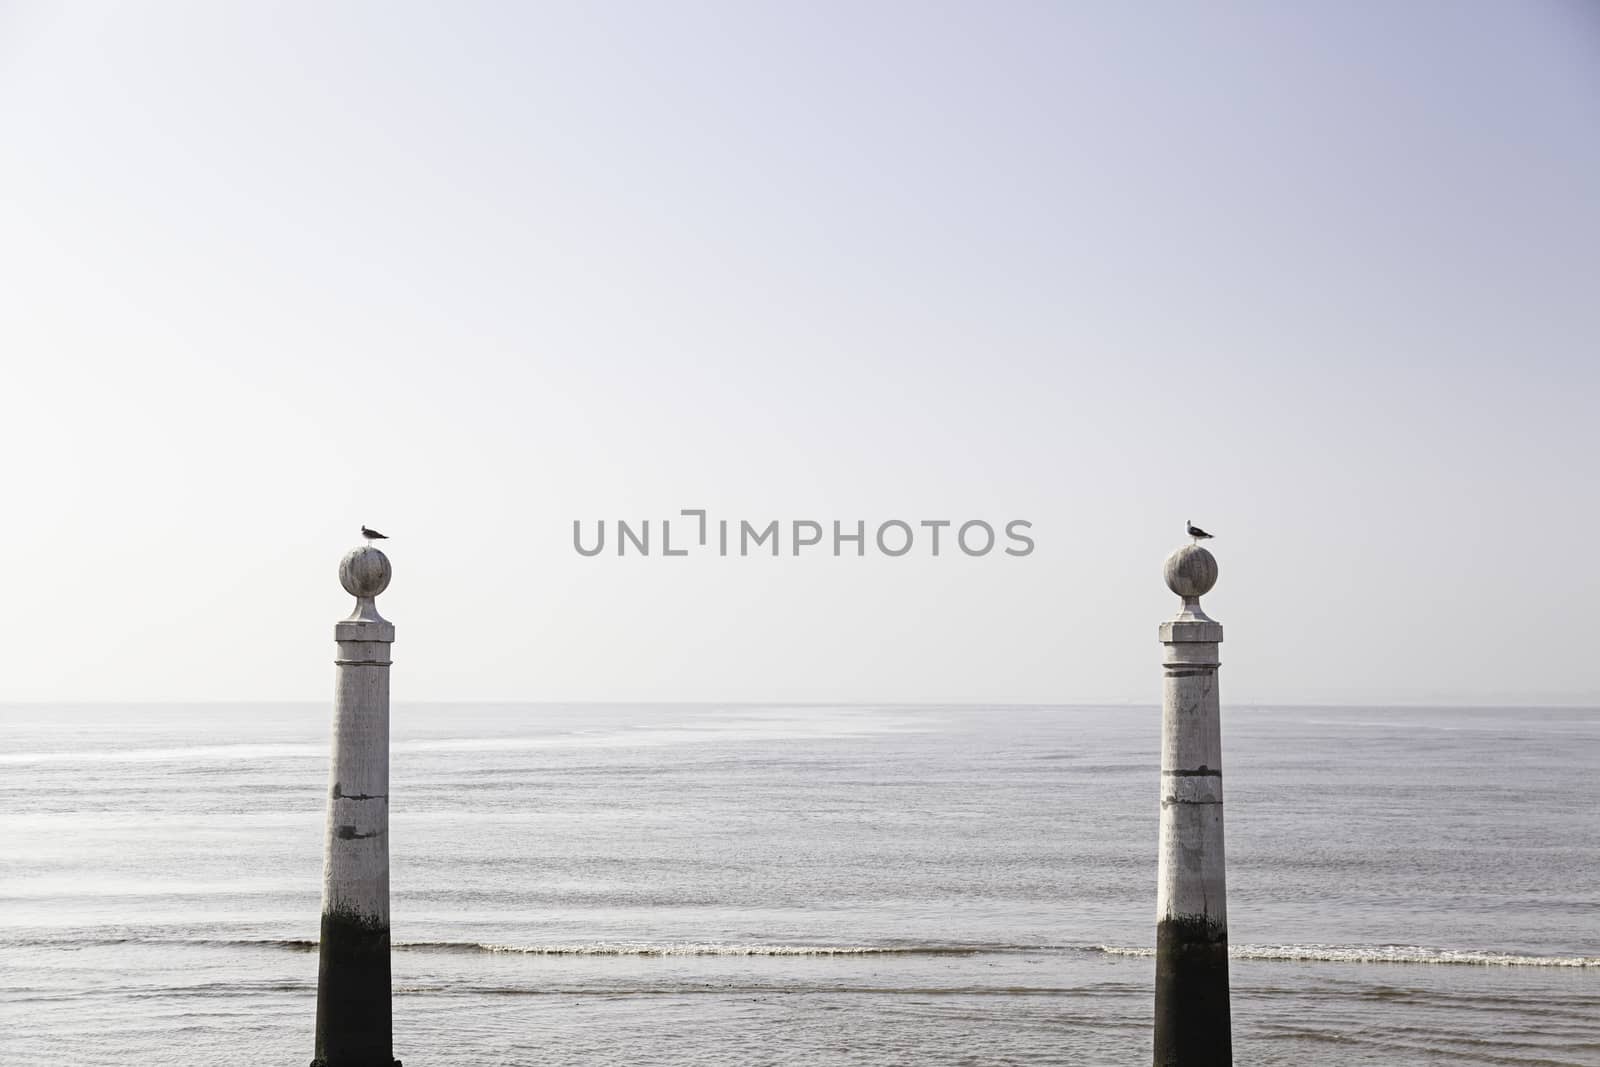 Seagull perched on a post in the sea by esebene